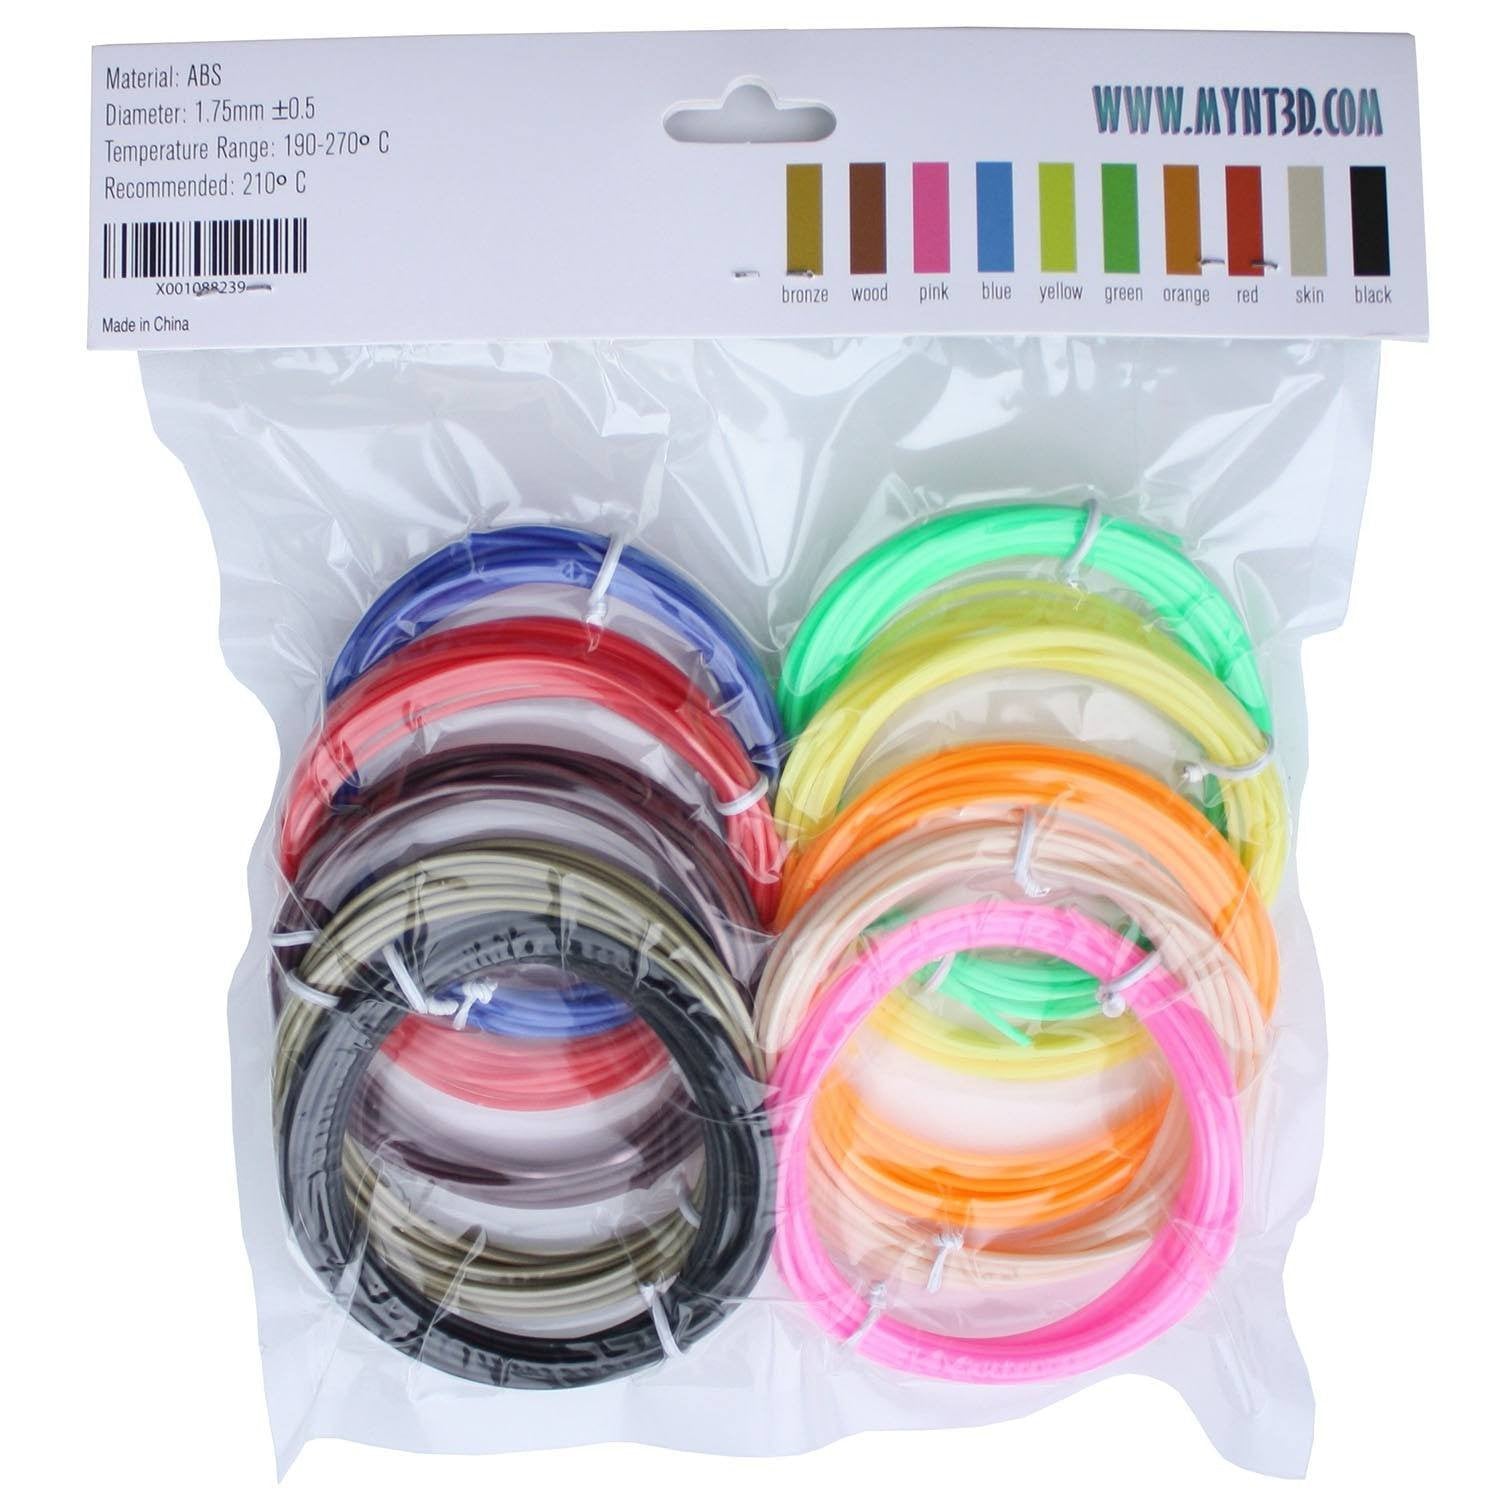 What filament is best for 3D pens? PCL, PLA or ABS?